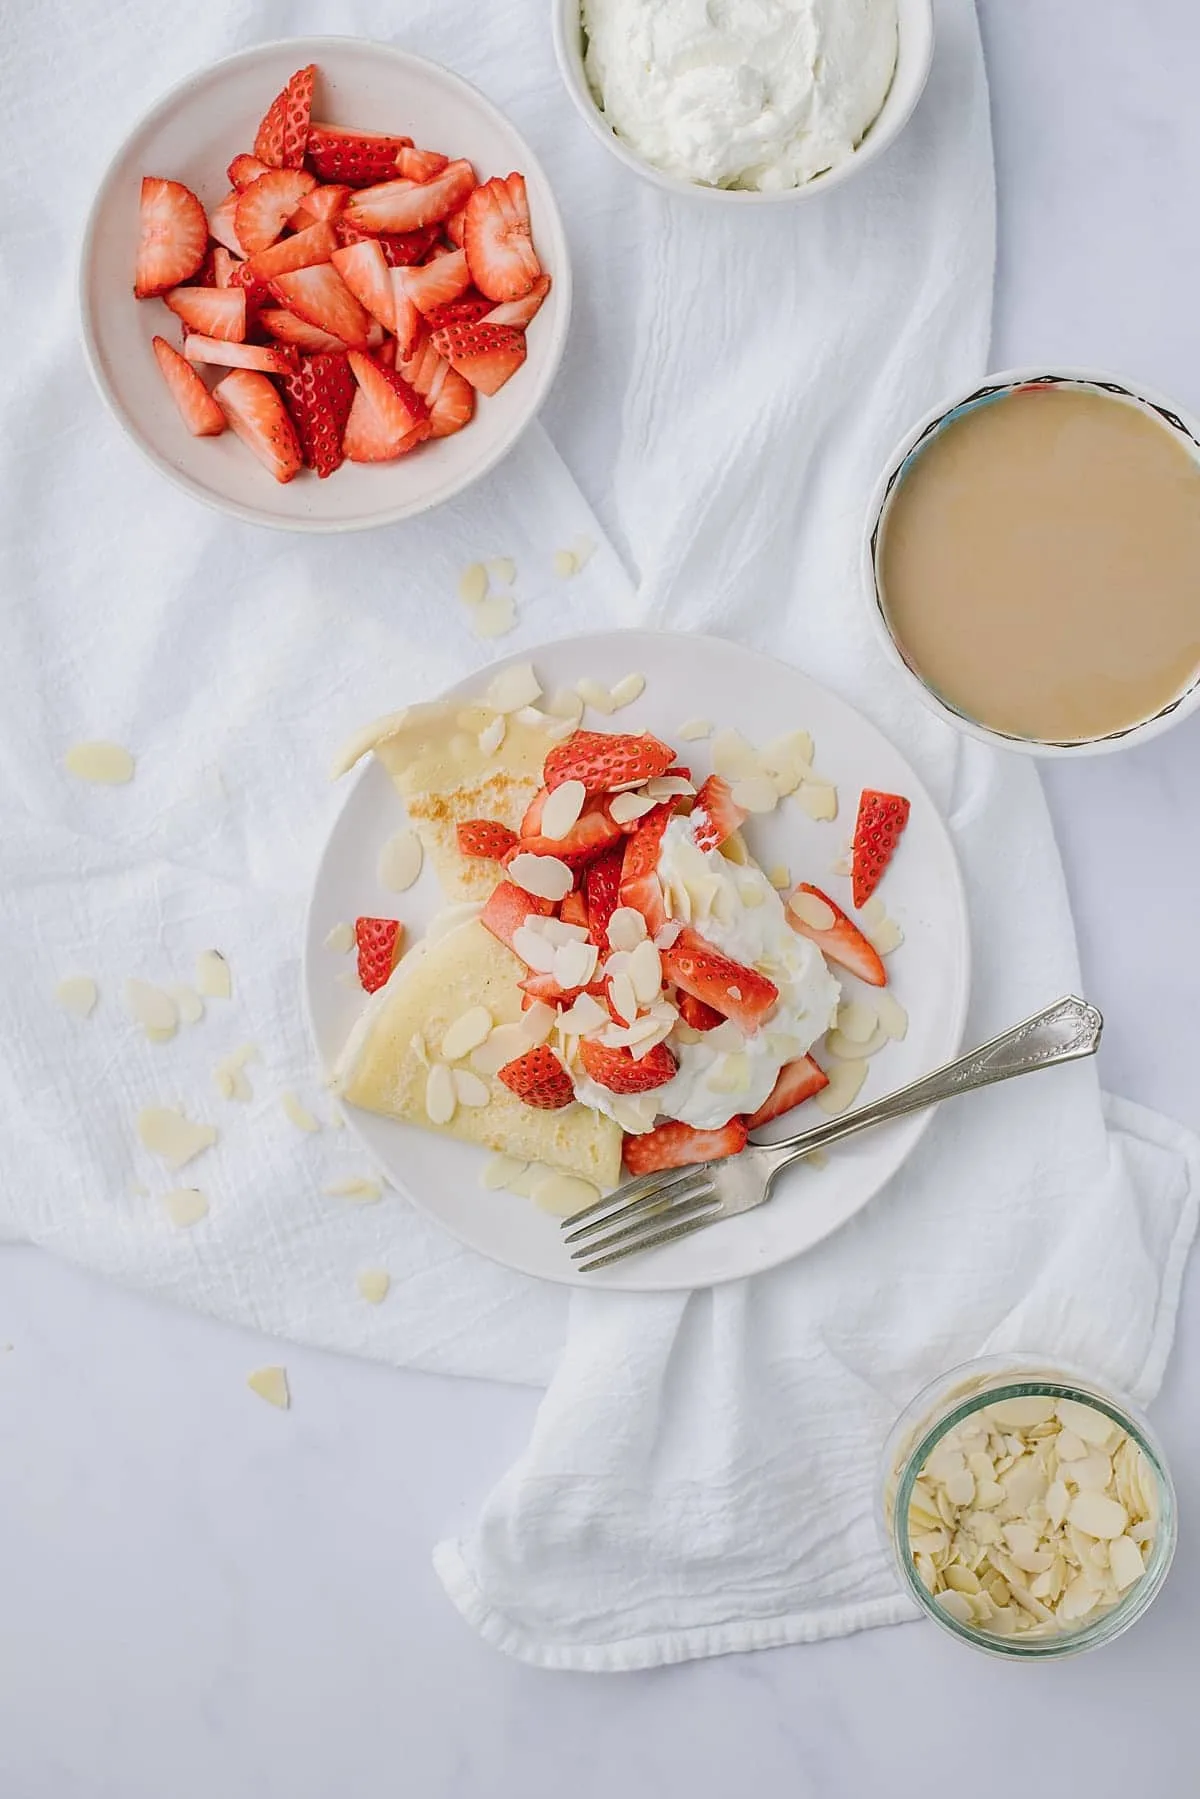 Strawberry and cream crepes